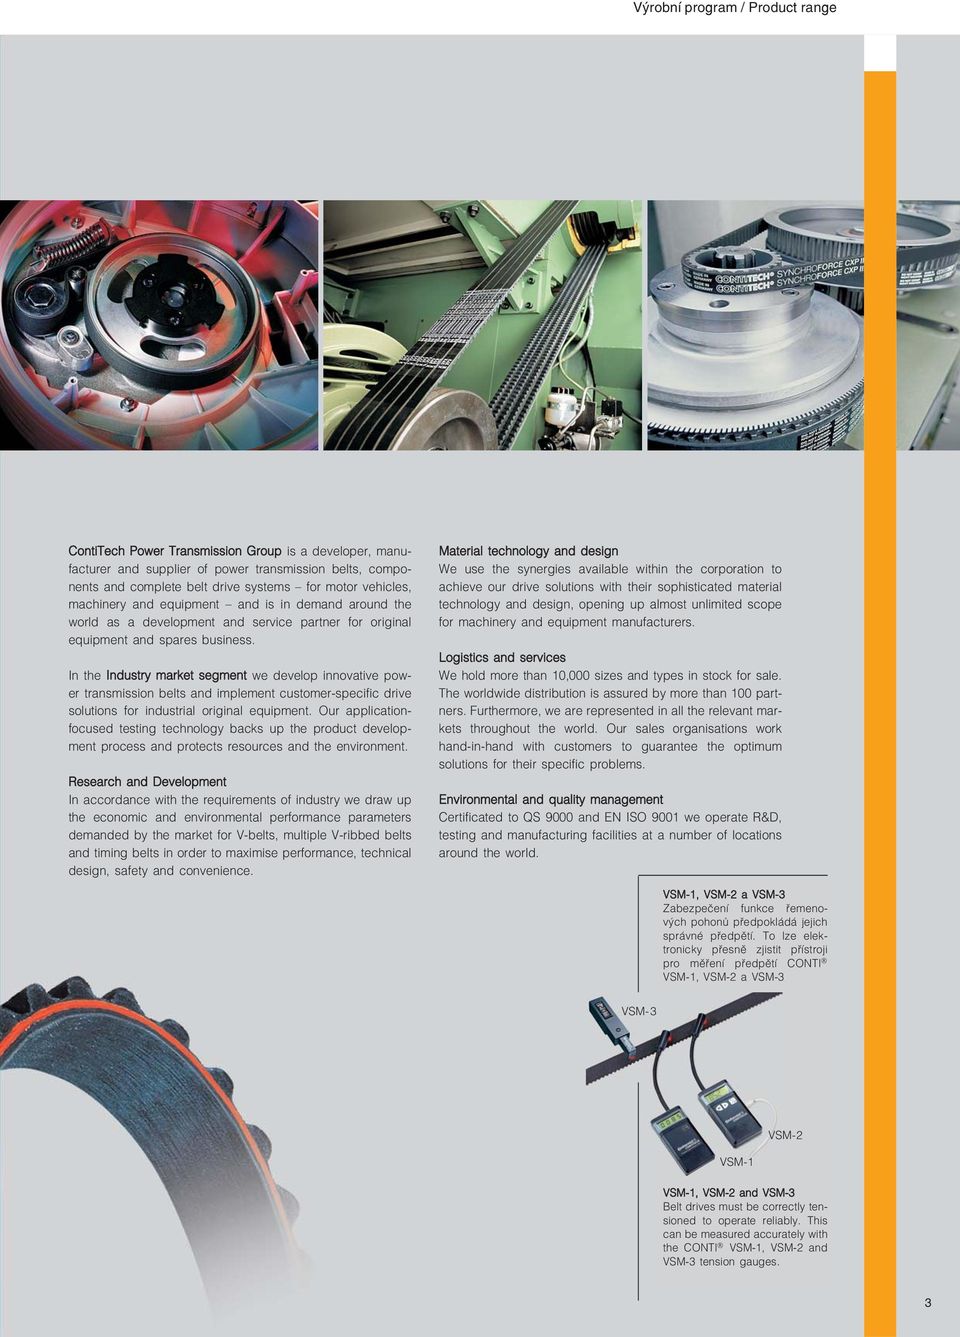 In the Industry market segment we develop innovative pow er transmission belts and implement customer specific drive solutions for industrial original equipment.